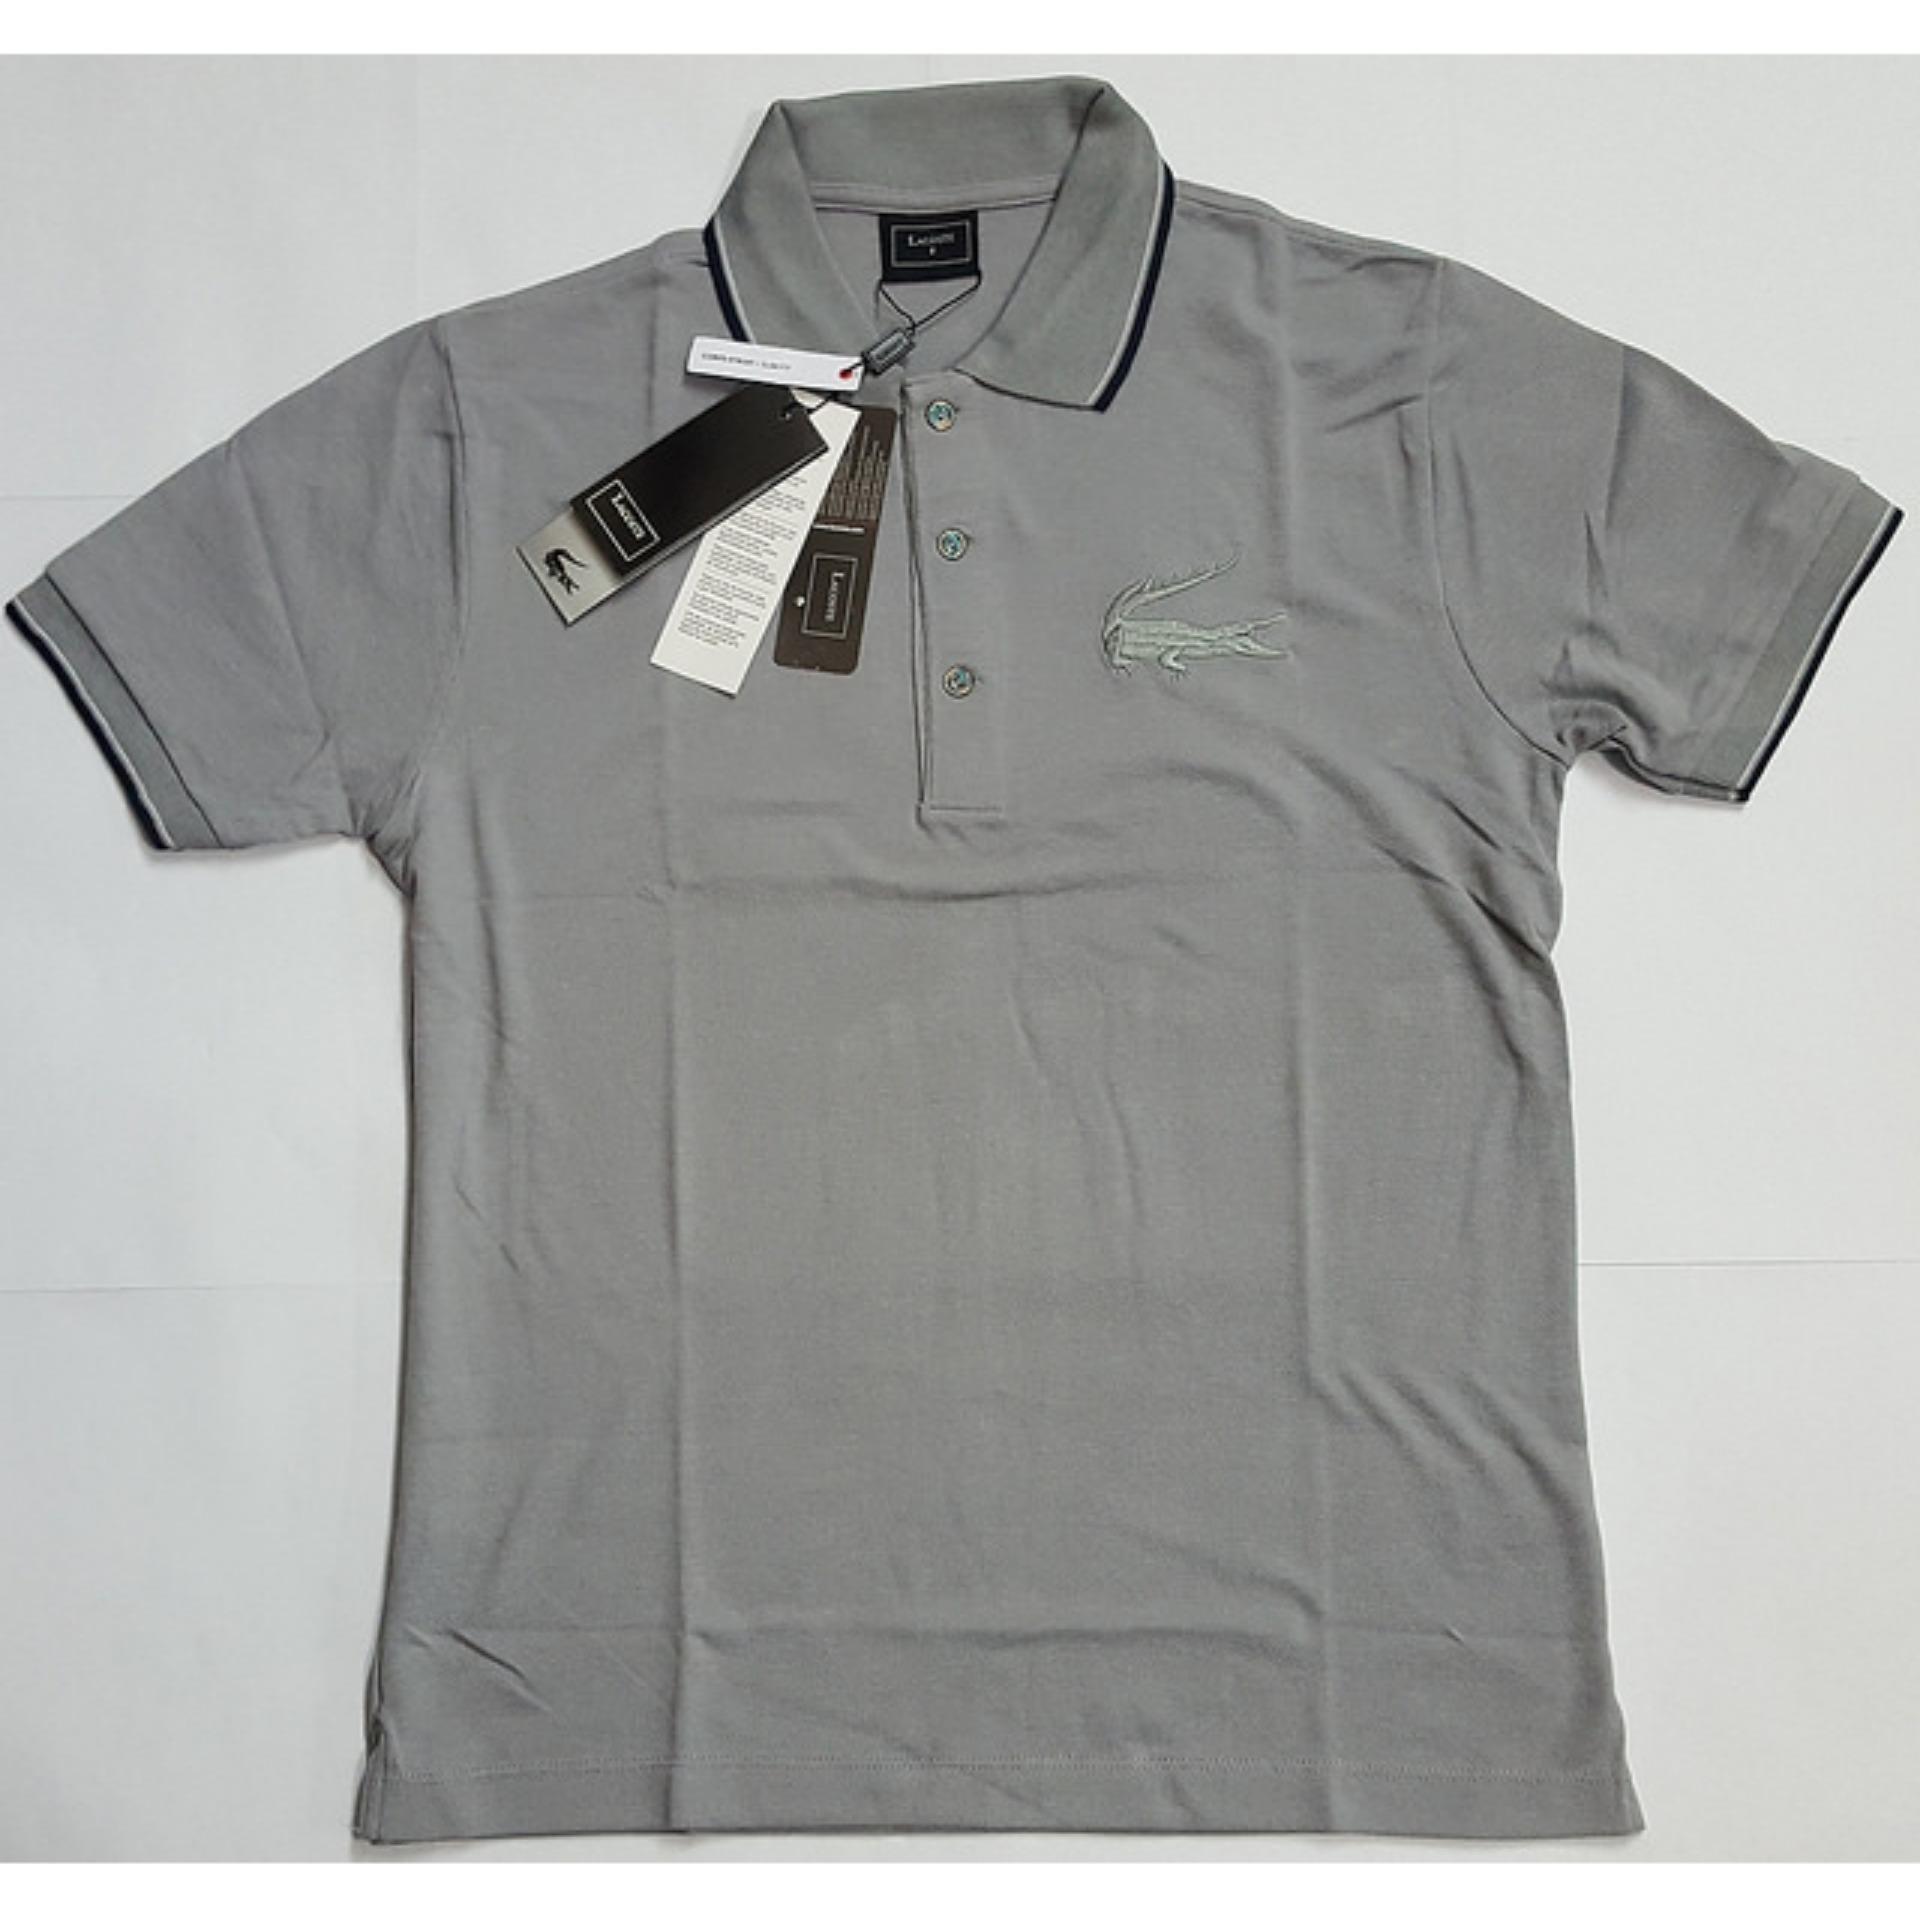 lacoste t shirt womens price